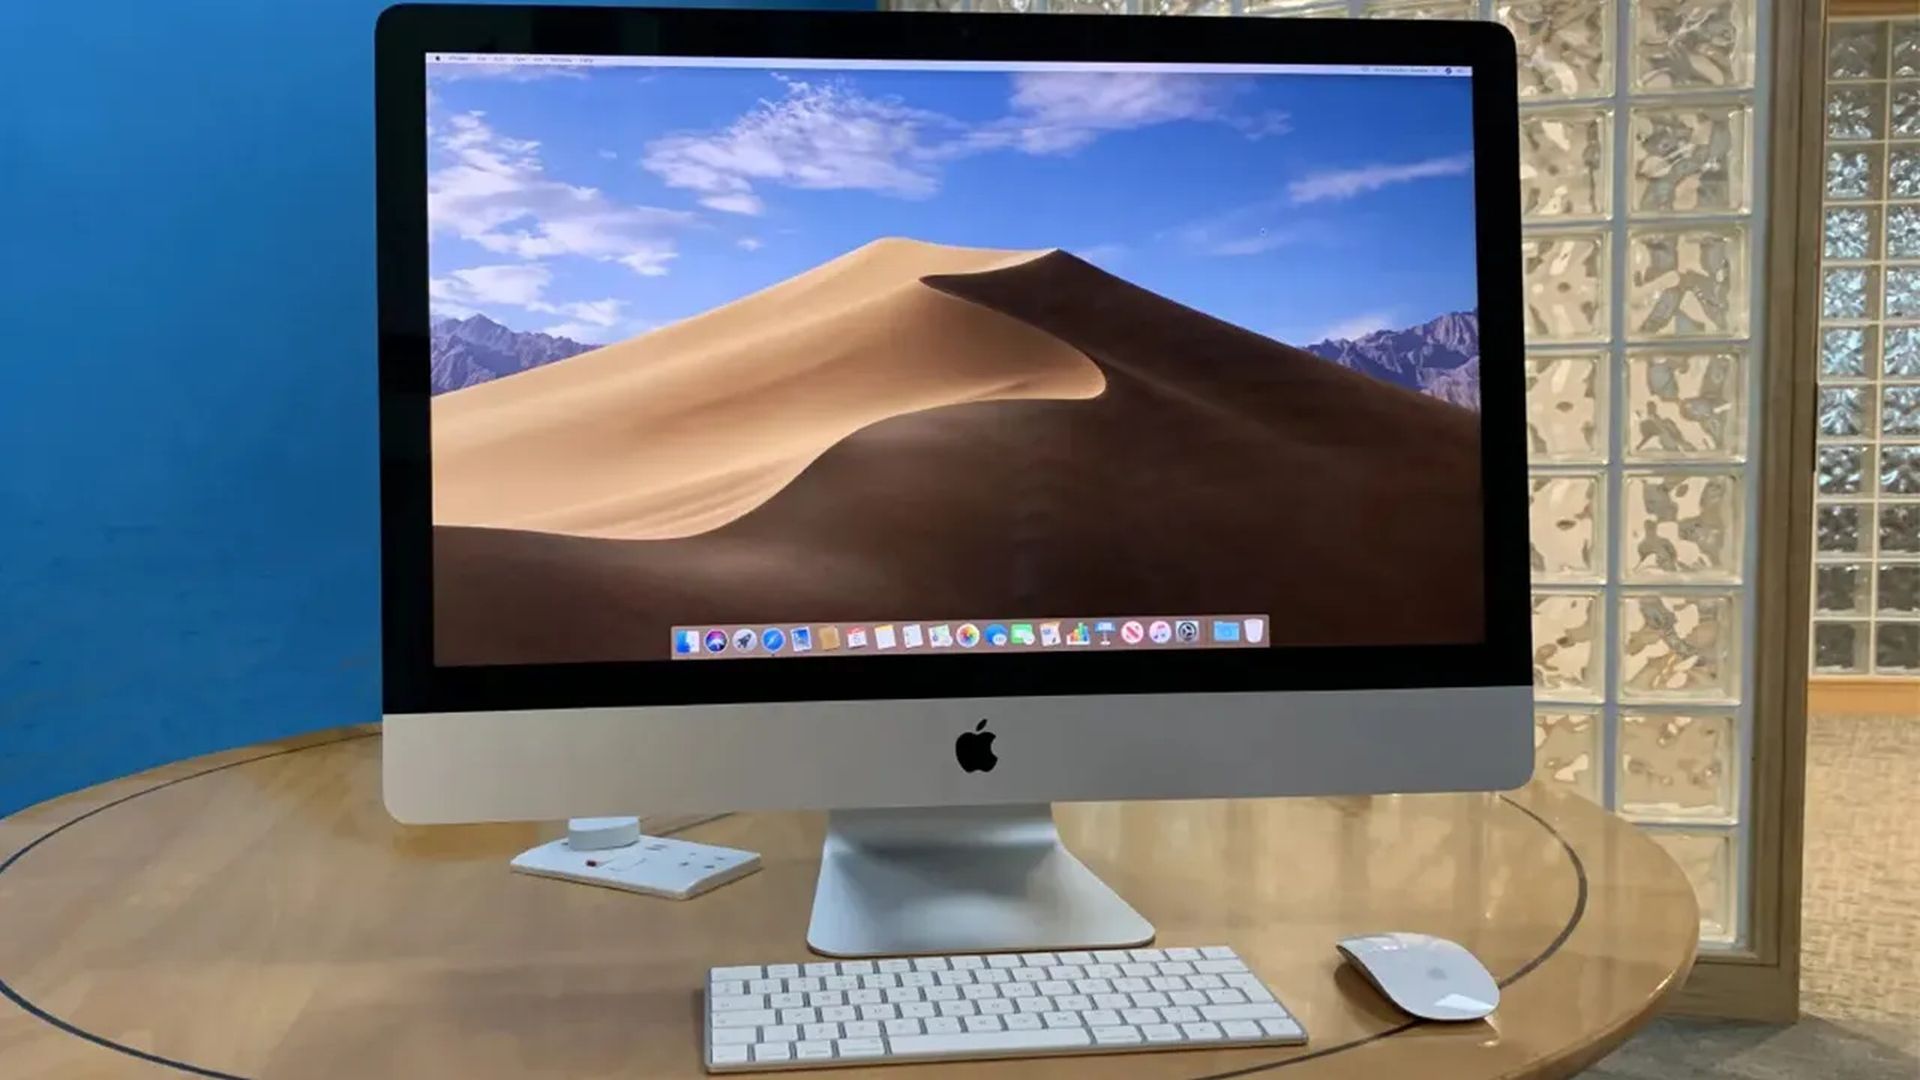 In this article, we are going to be going over the rumors about iMac 27-inch, its release date, price, and more.